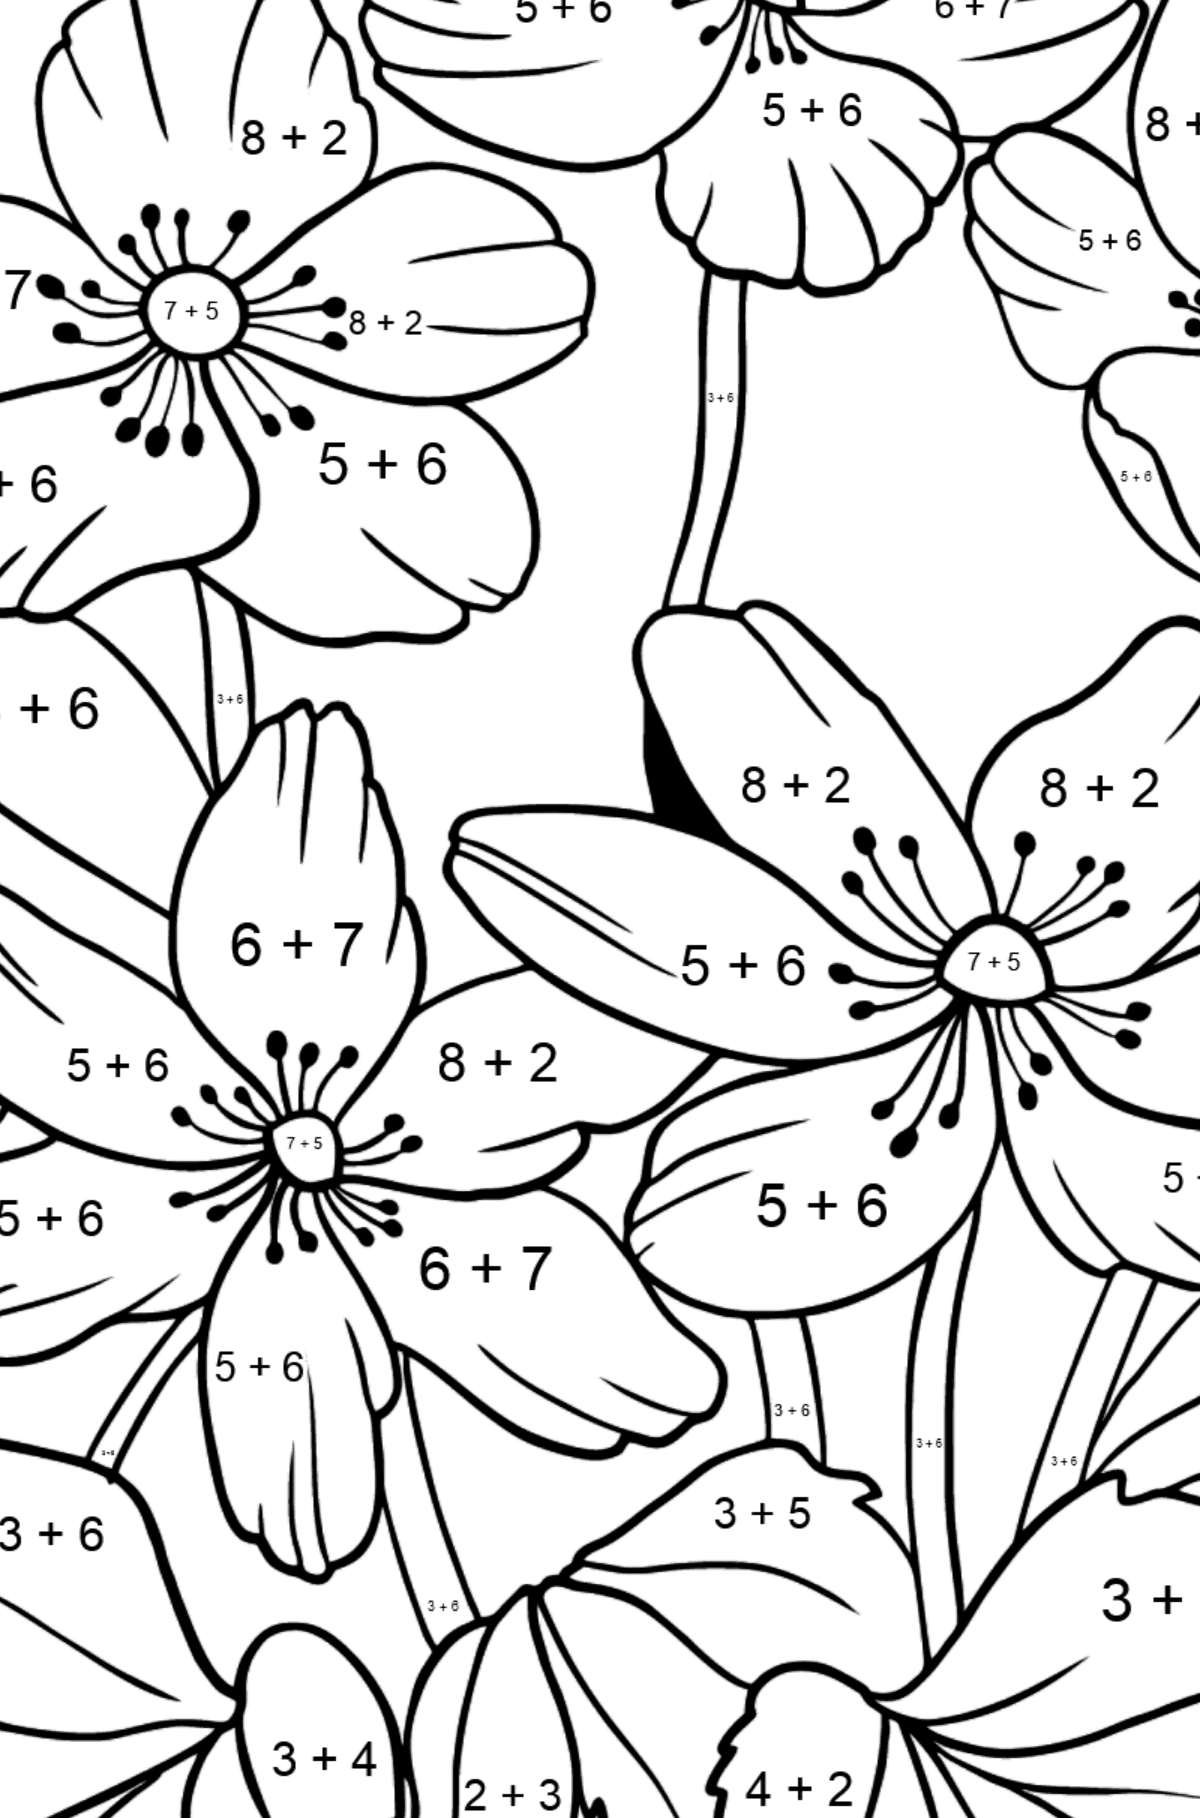 Flower Coloring Page - A Windflower with Yellow Petals - Math Coloring - Addition for Kids